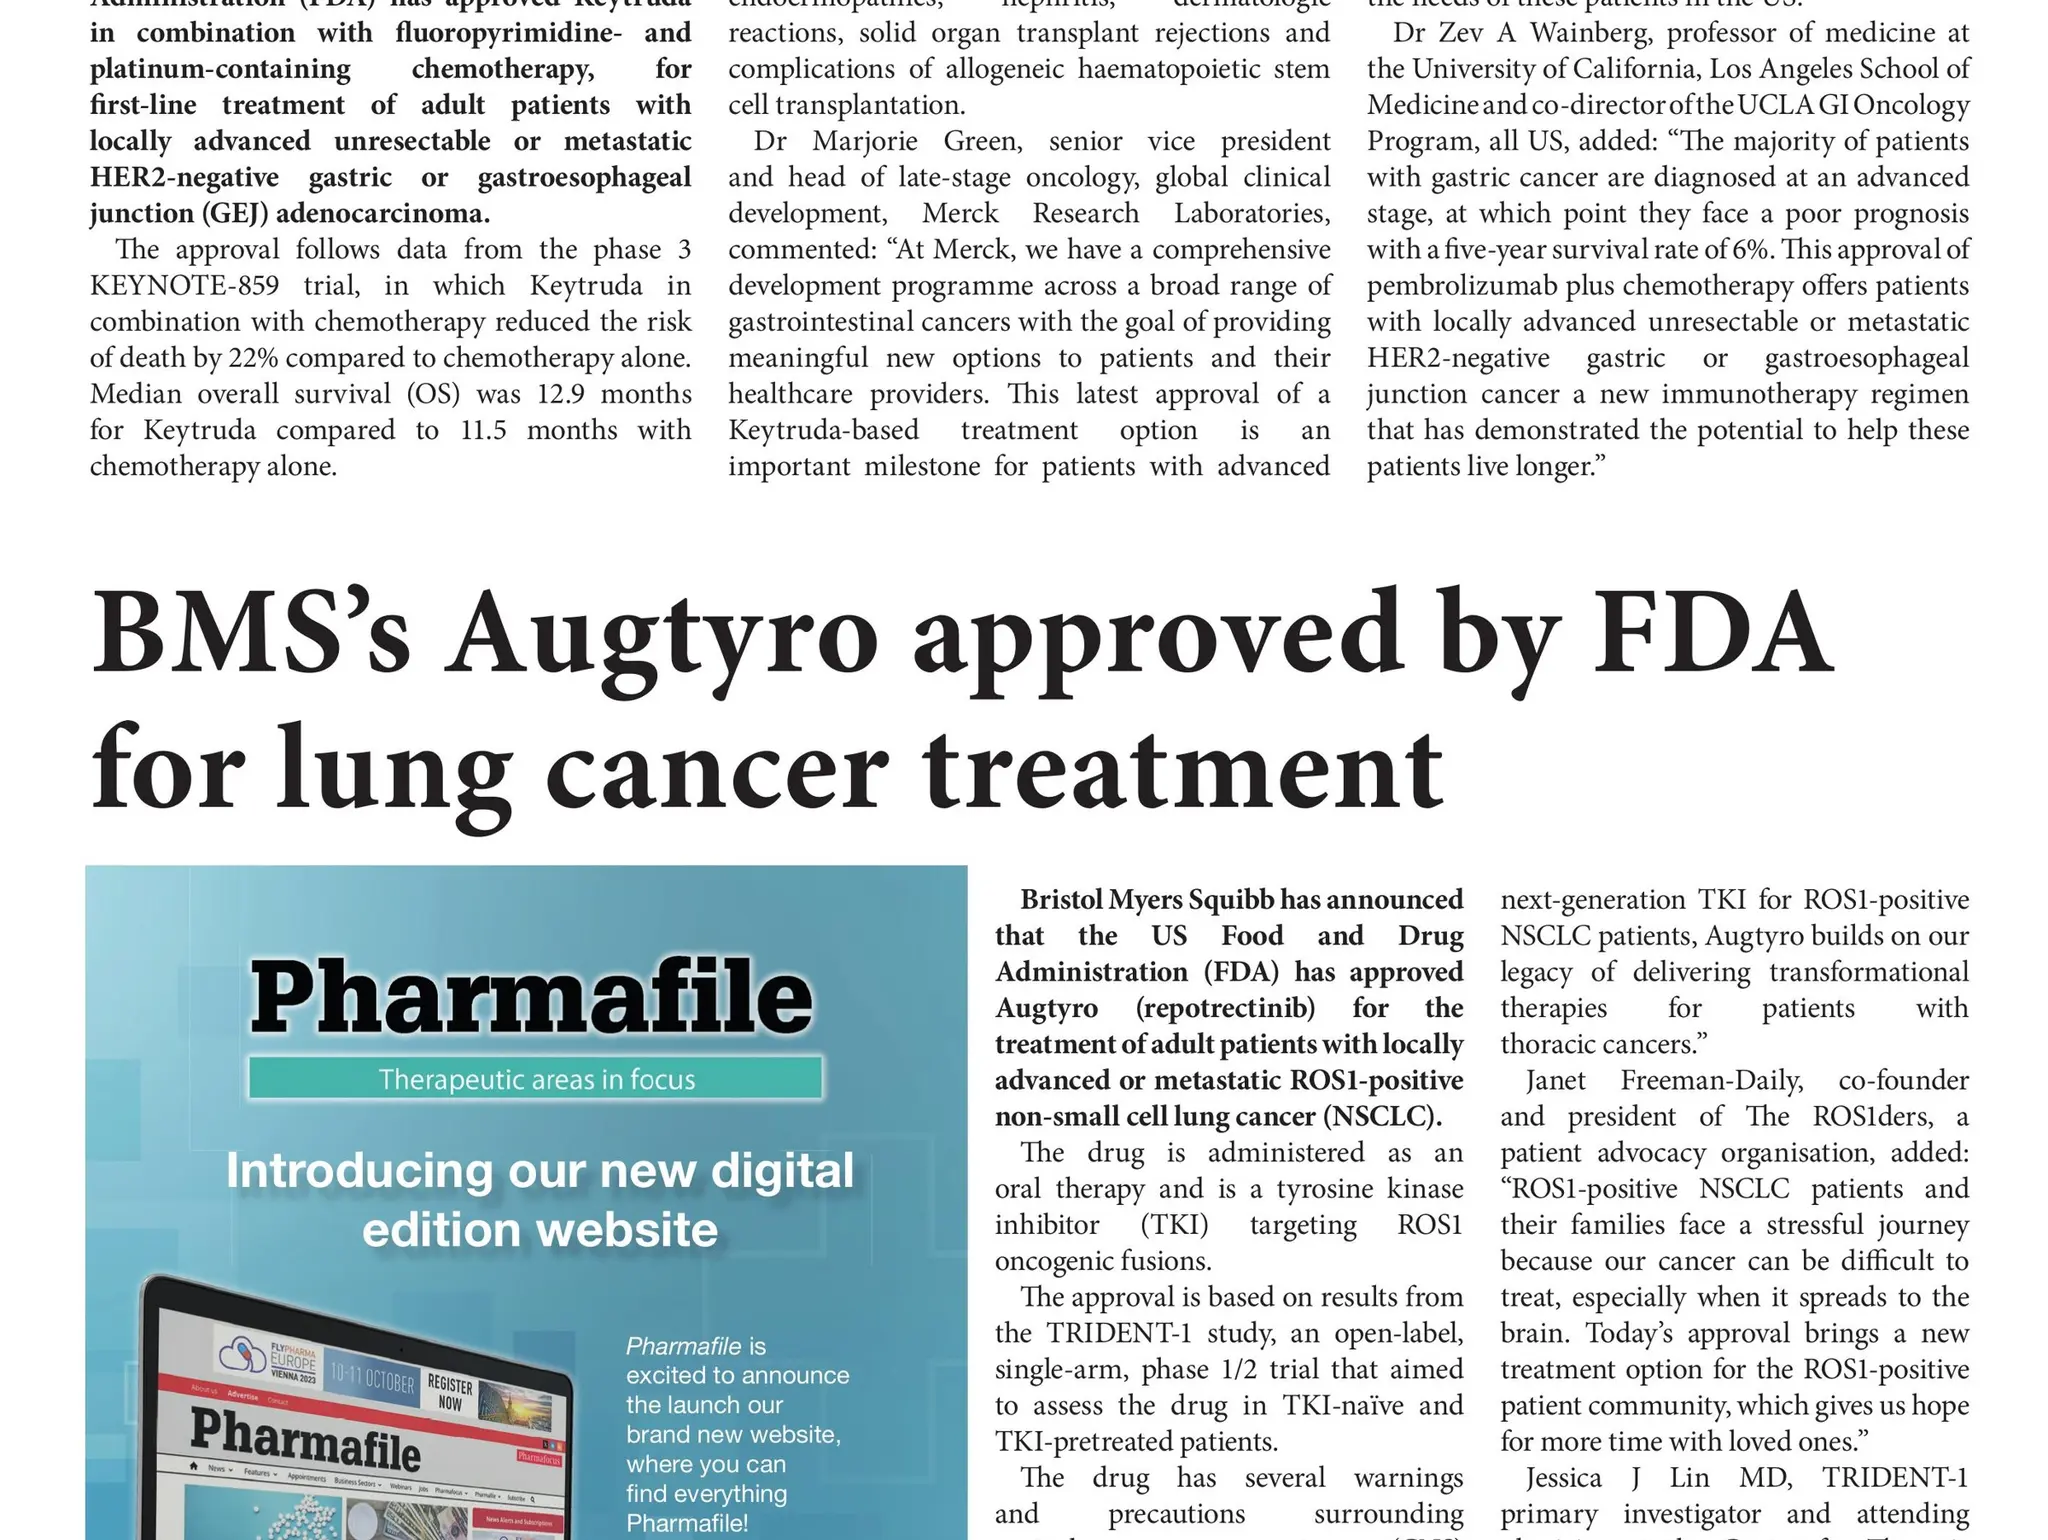 BMS’s Augtyro approved by FDA for lung cancer treatment